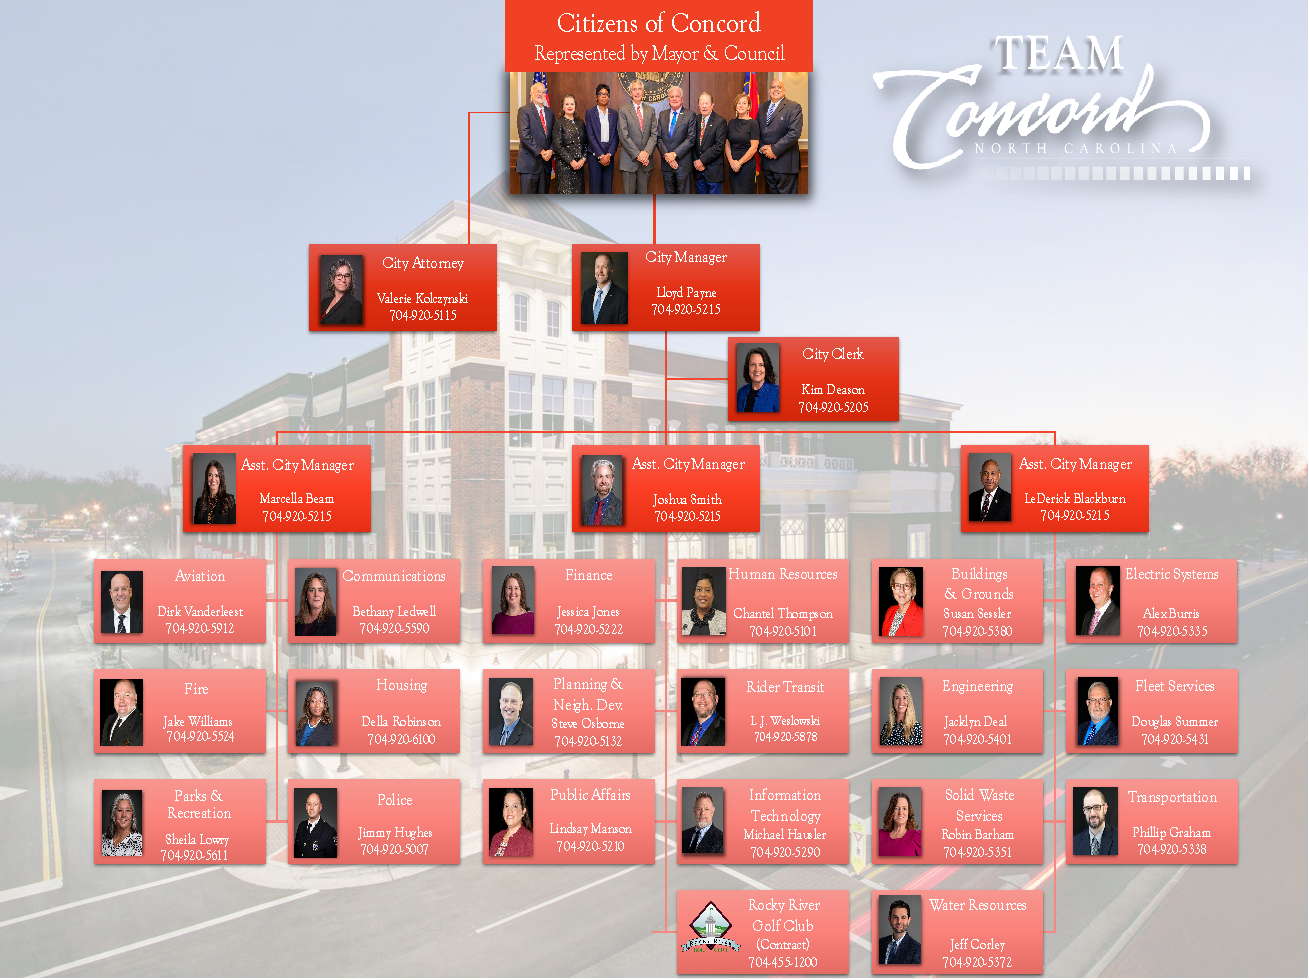 City of Concord Organizational Chart